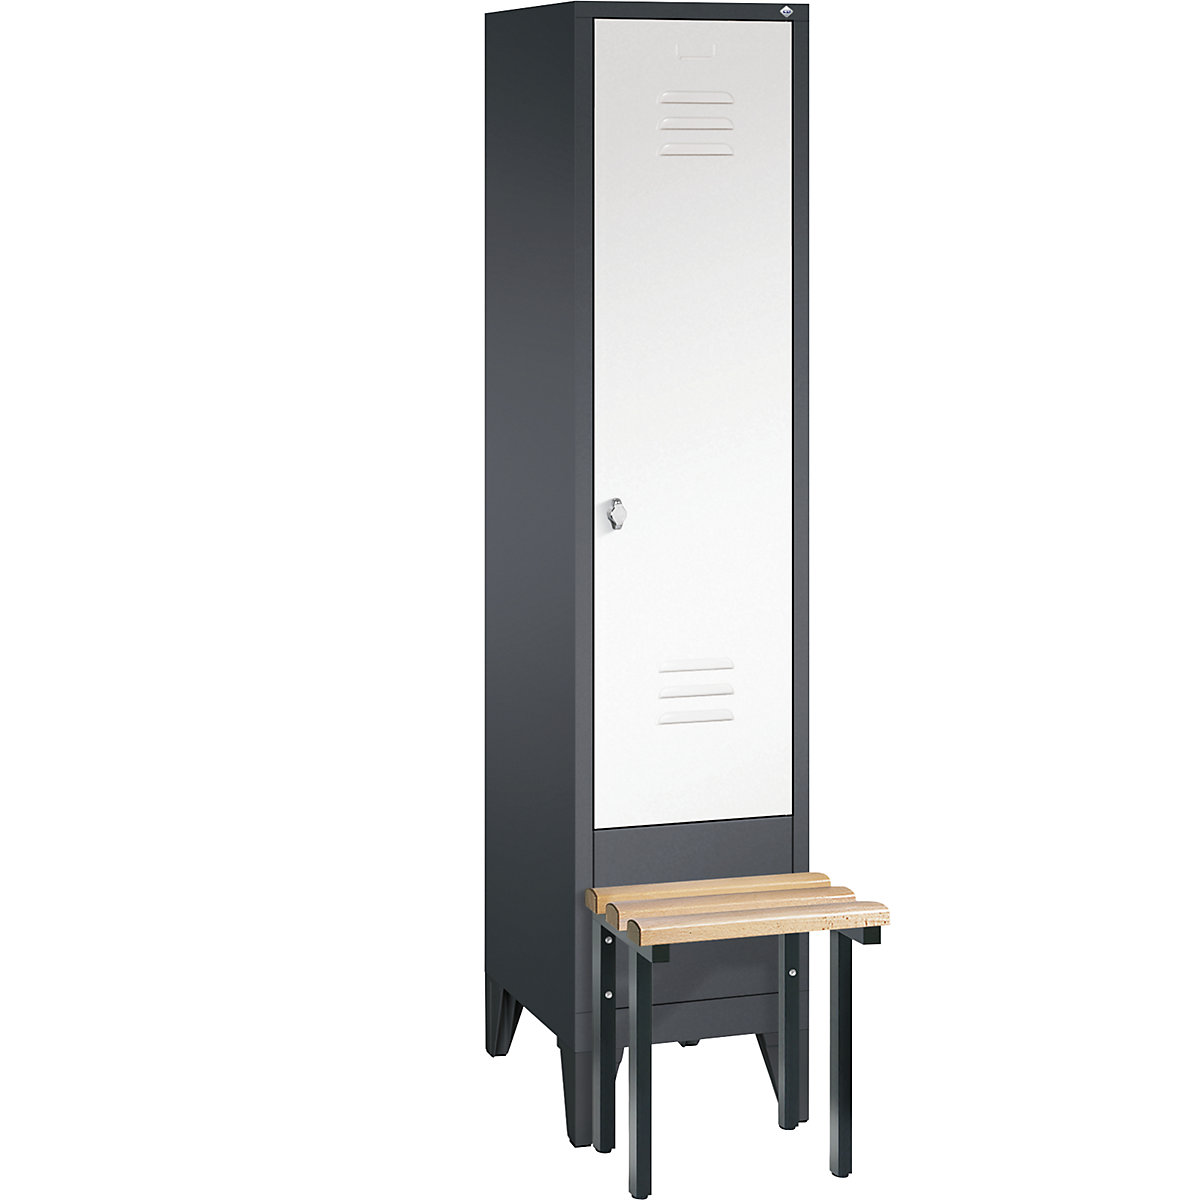 CLASSIC cloakroom locker with bench mounted in front – C+P, 1 compartment, compartment width 400 mm, black grey / traffic white-3